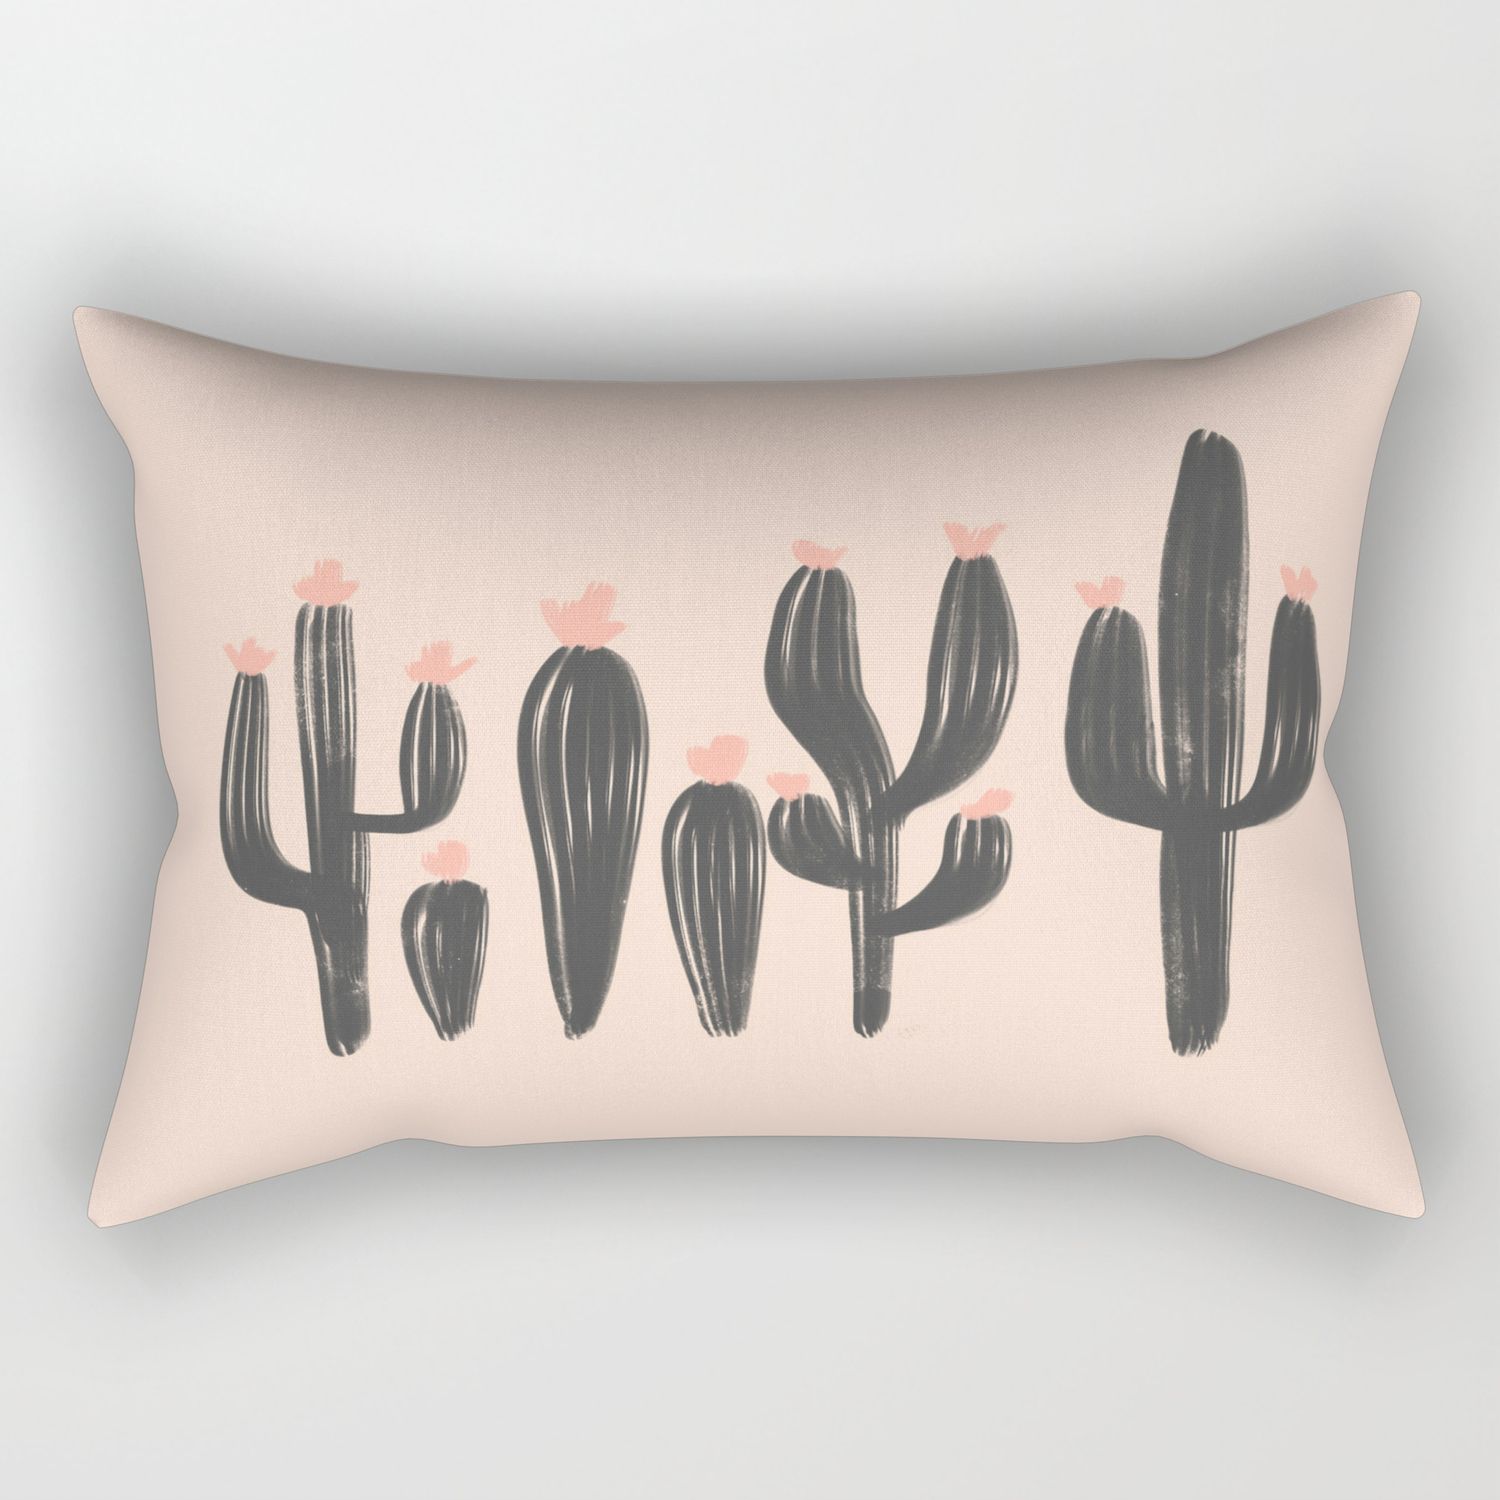 Cute Southwestern Cacti Illustration On Pink Rectangular Pillow Pertaining To Southwest Pink Credenzas (View 18 of 30)